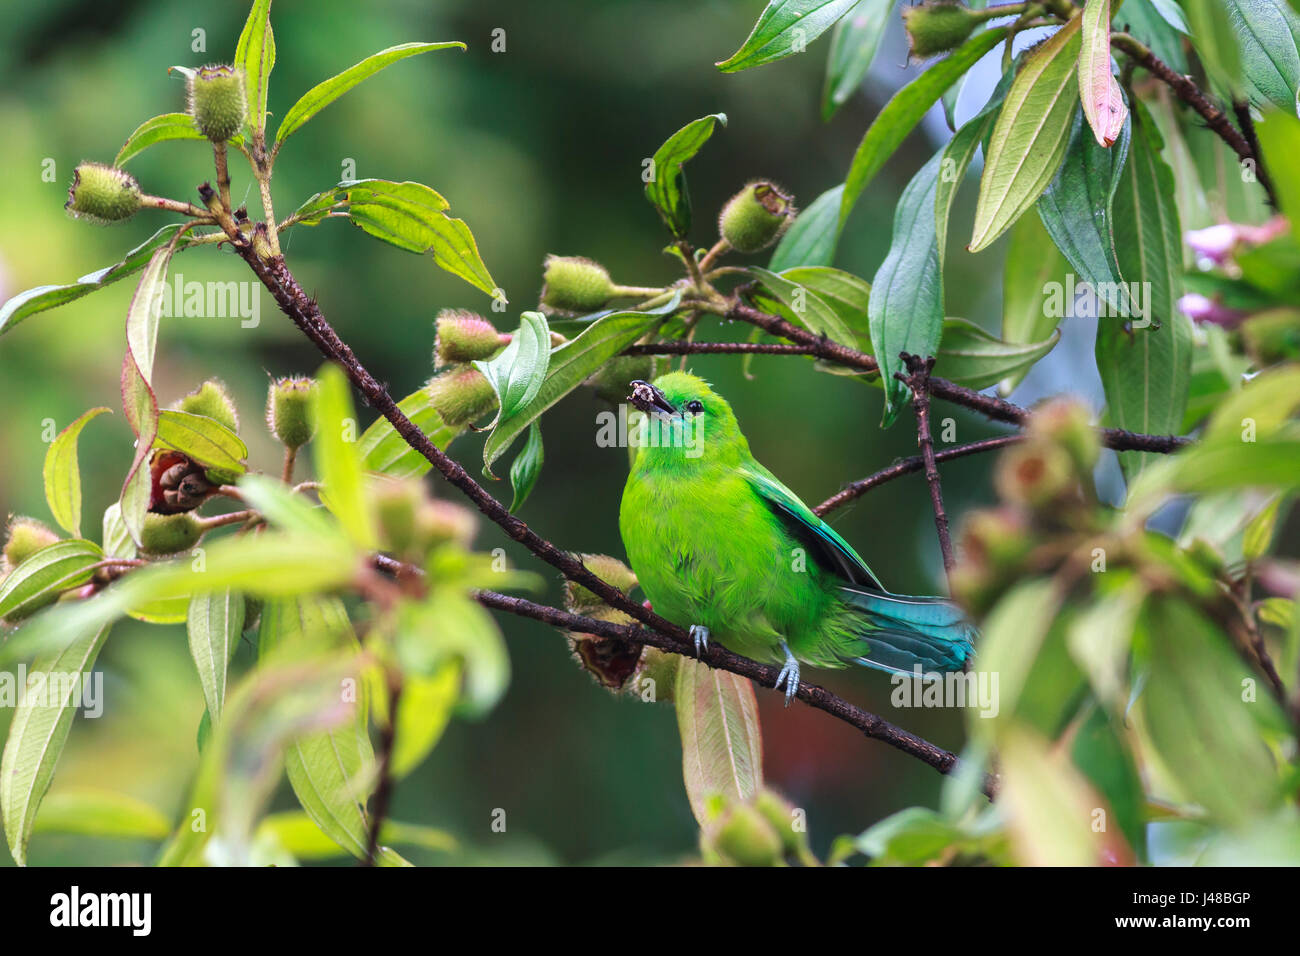 leafbird with green blue color eating a berry on branch Stock Photo